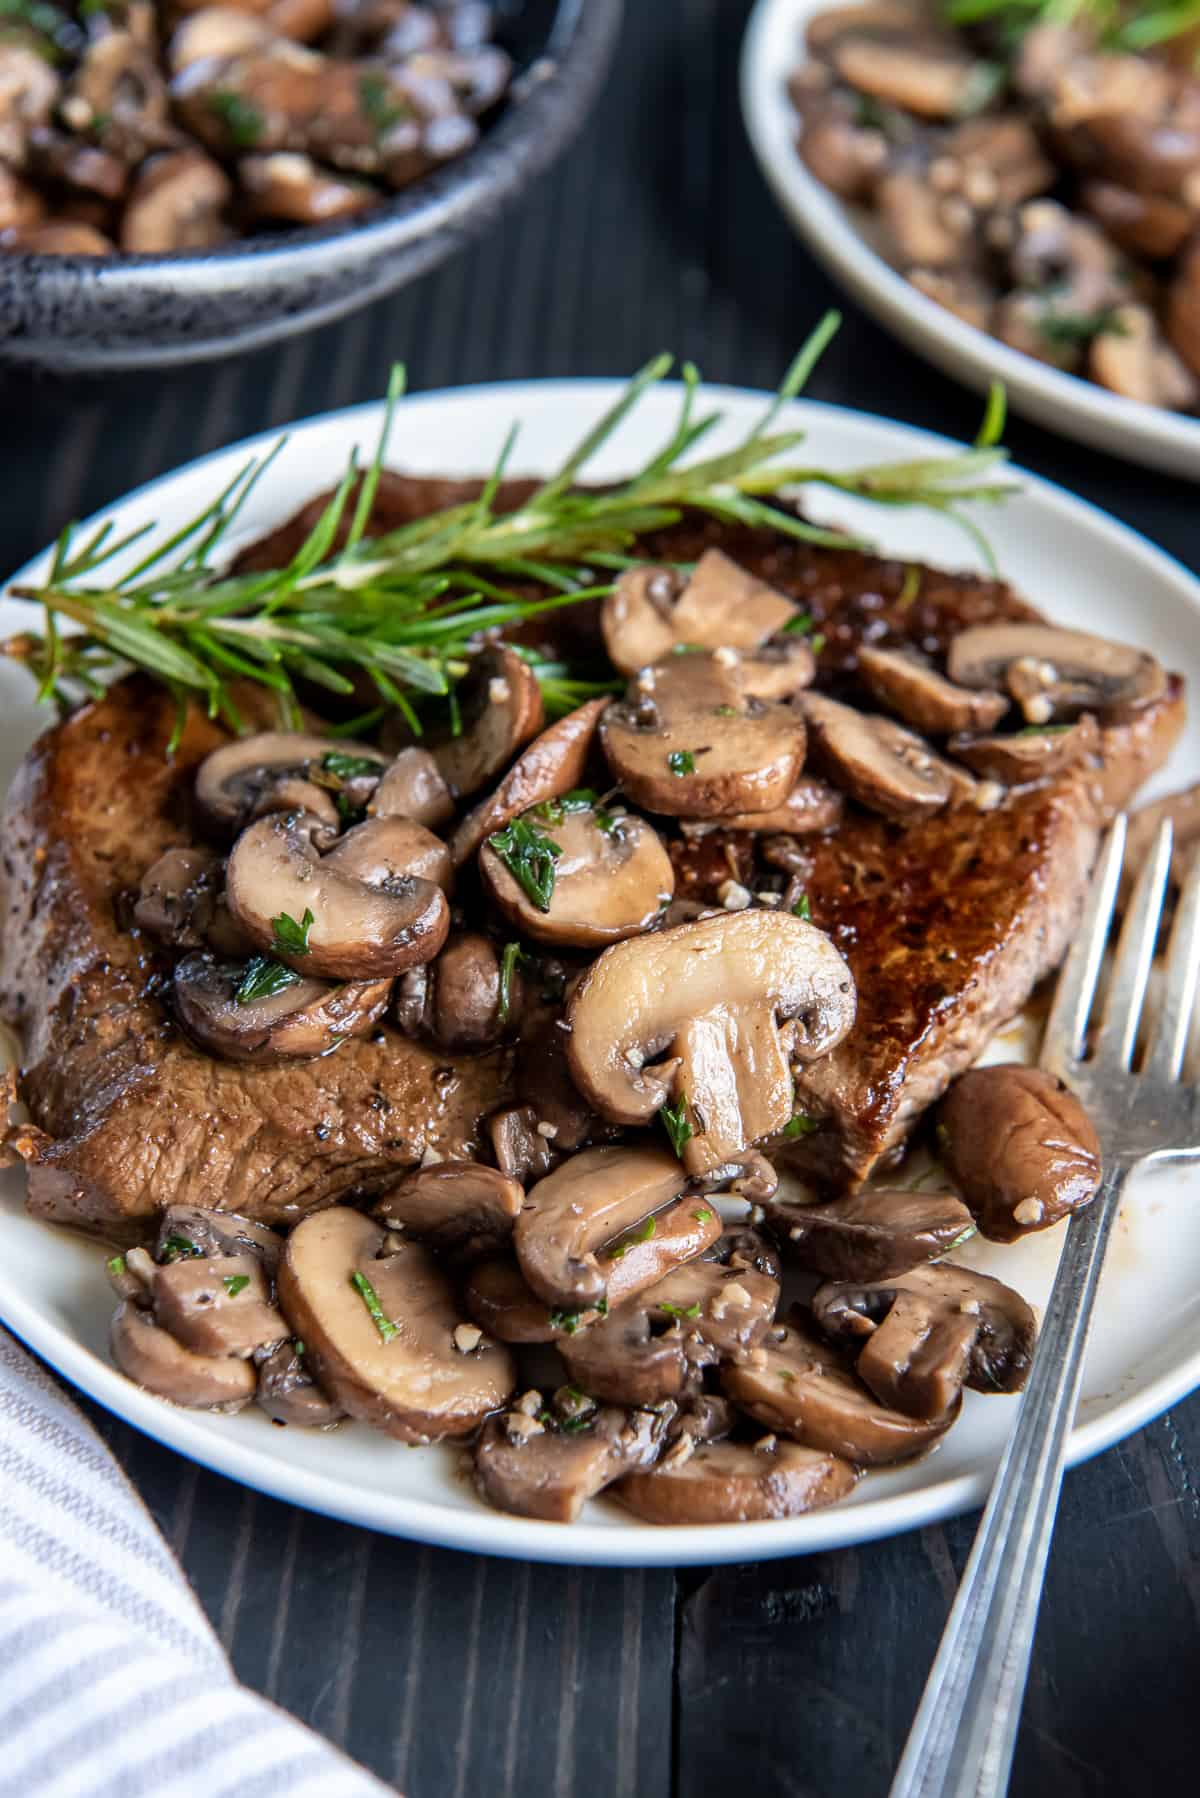 Cooked steak smothered with sauteed mushrooms on a white plate with a fork.